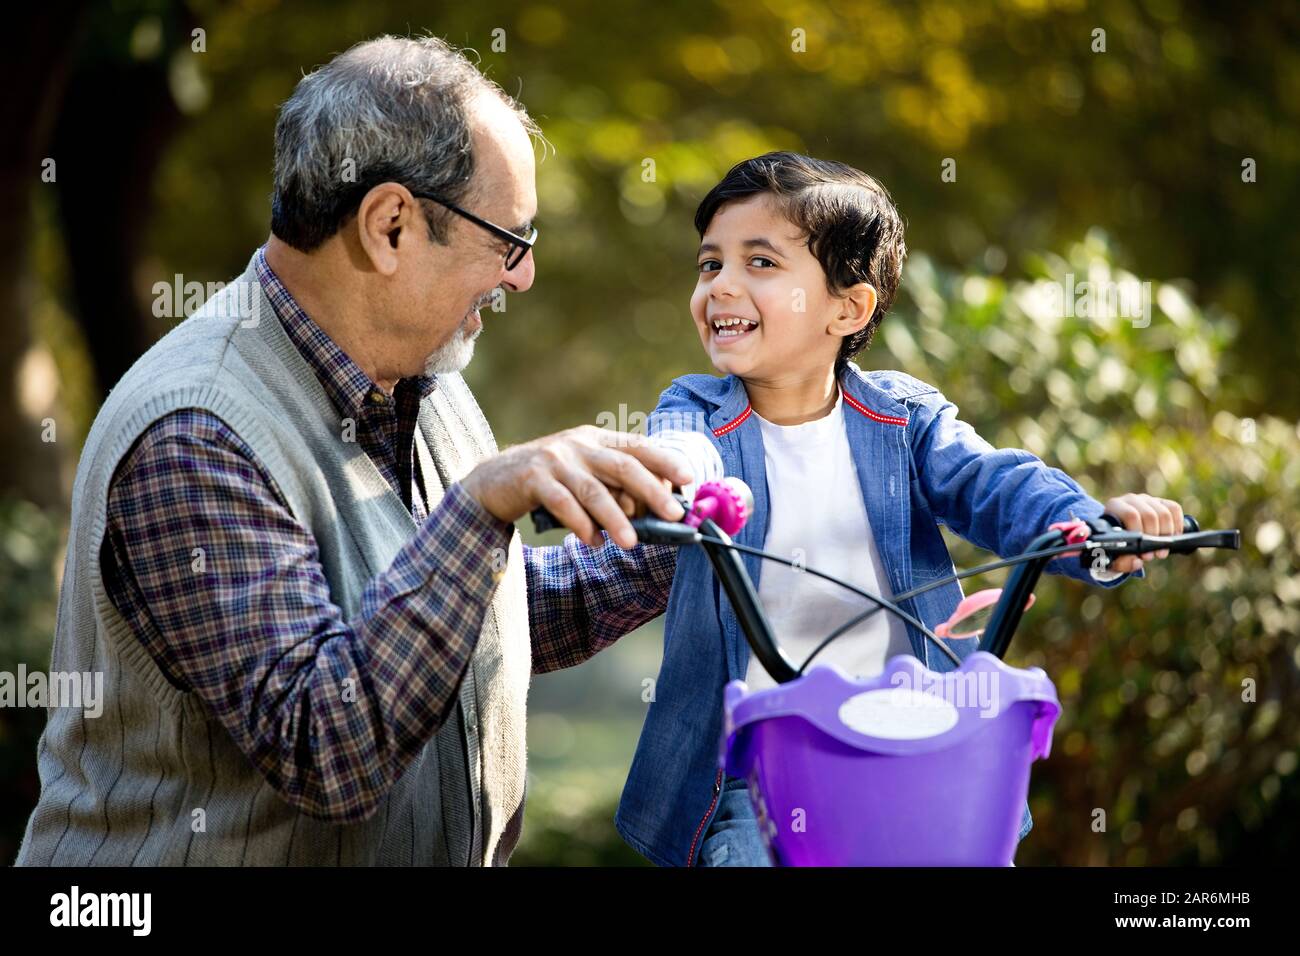 Grandfather teaching his grandson cycling at park Stock Photo